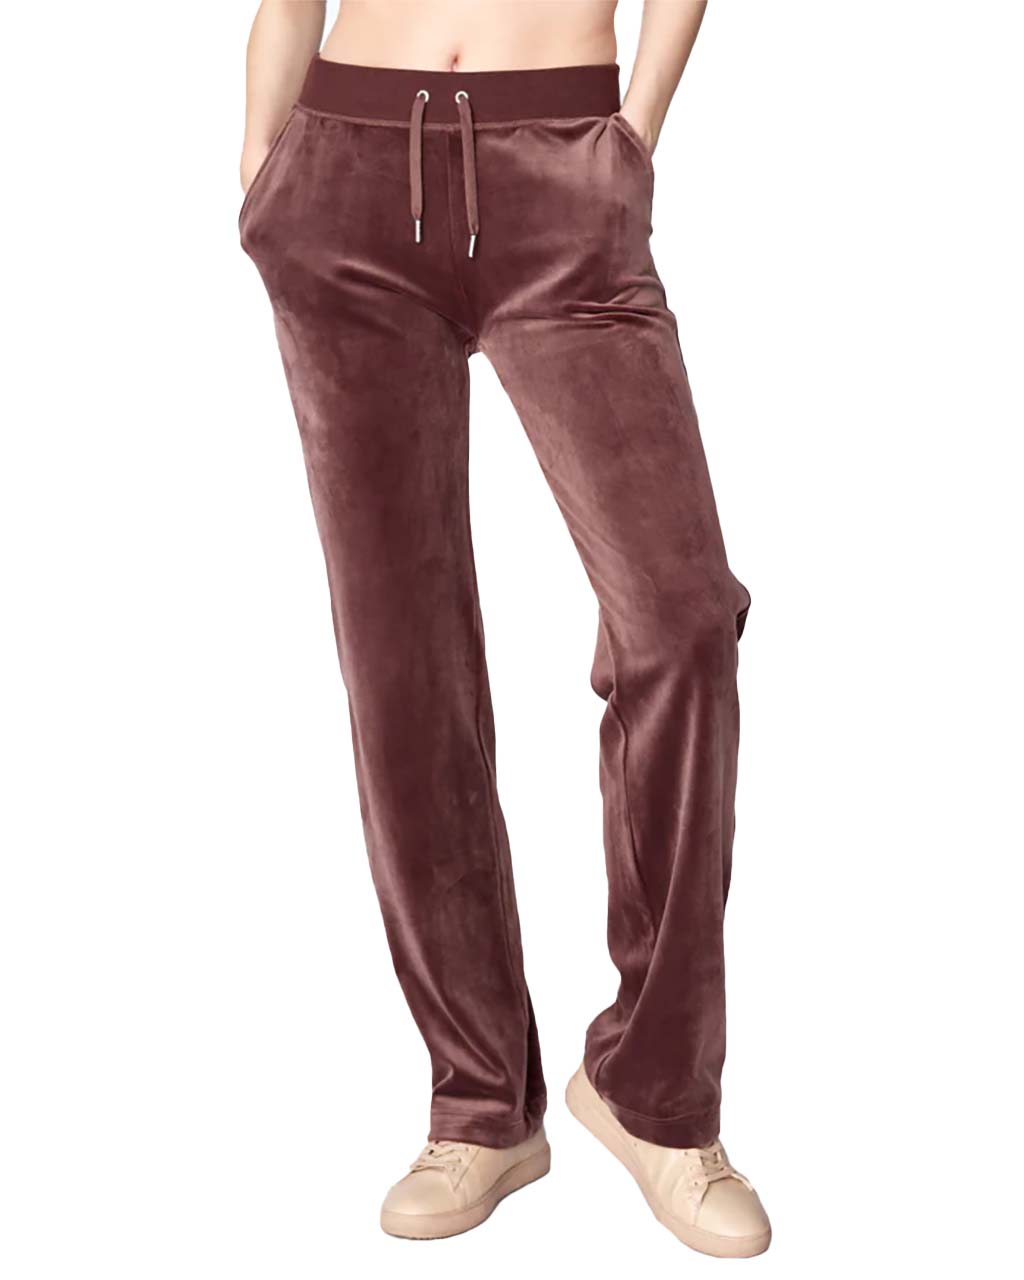 Juicy Couture Del Ray Diamante Track Pant W Bitter Chocolate (Storlek L)